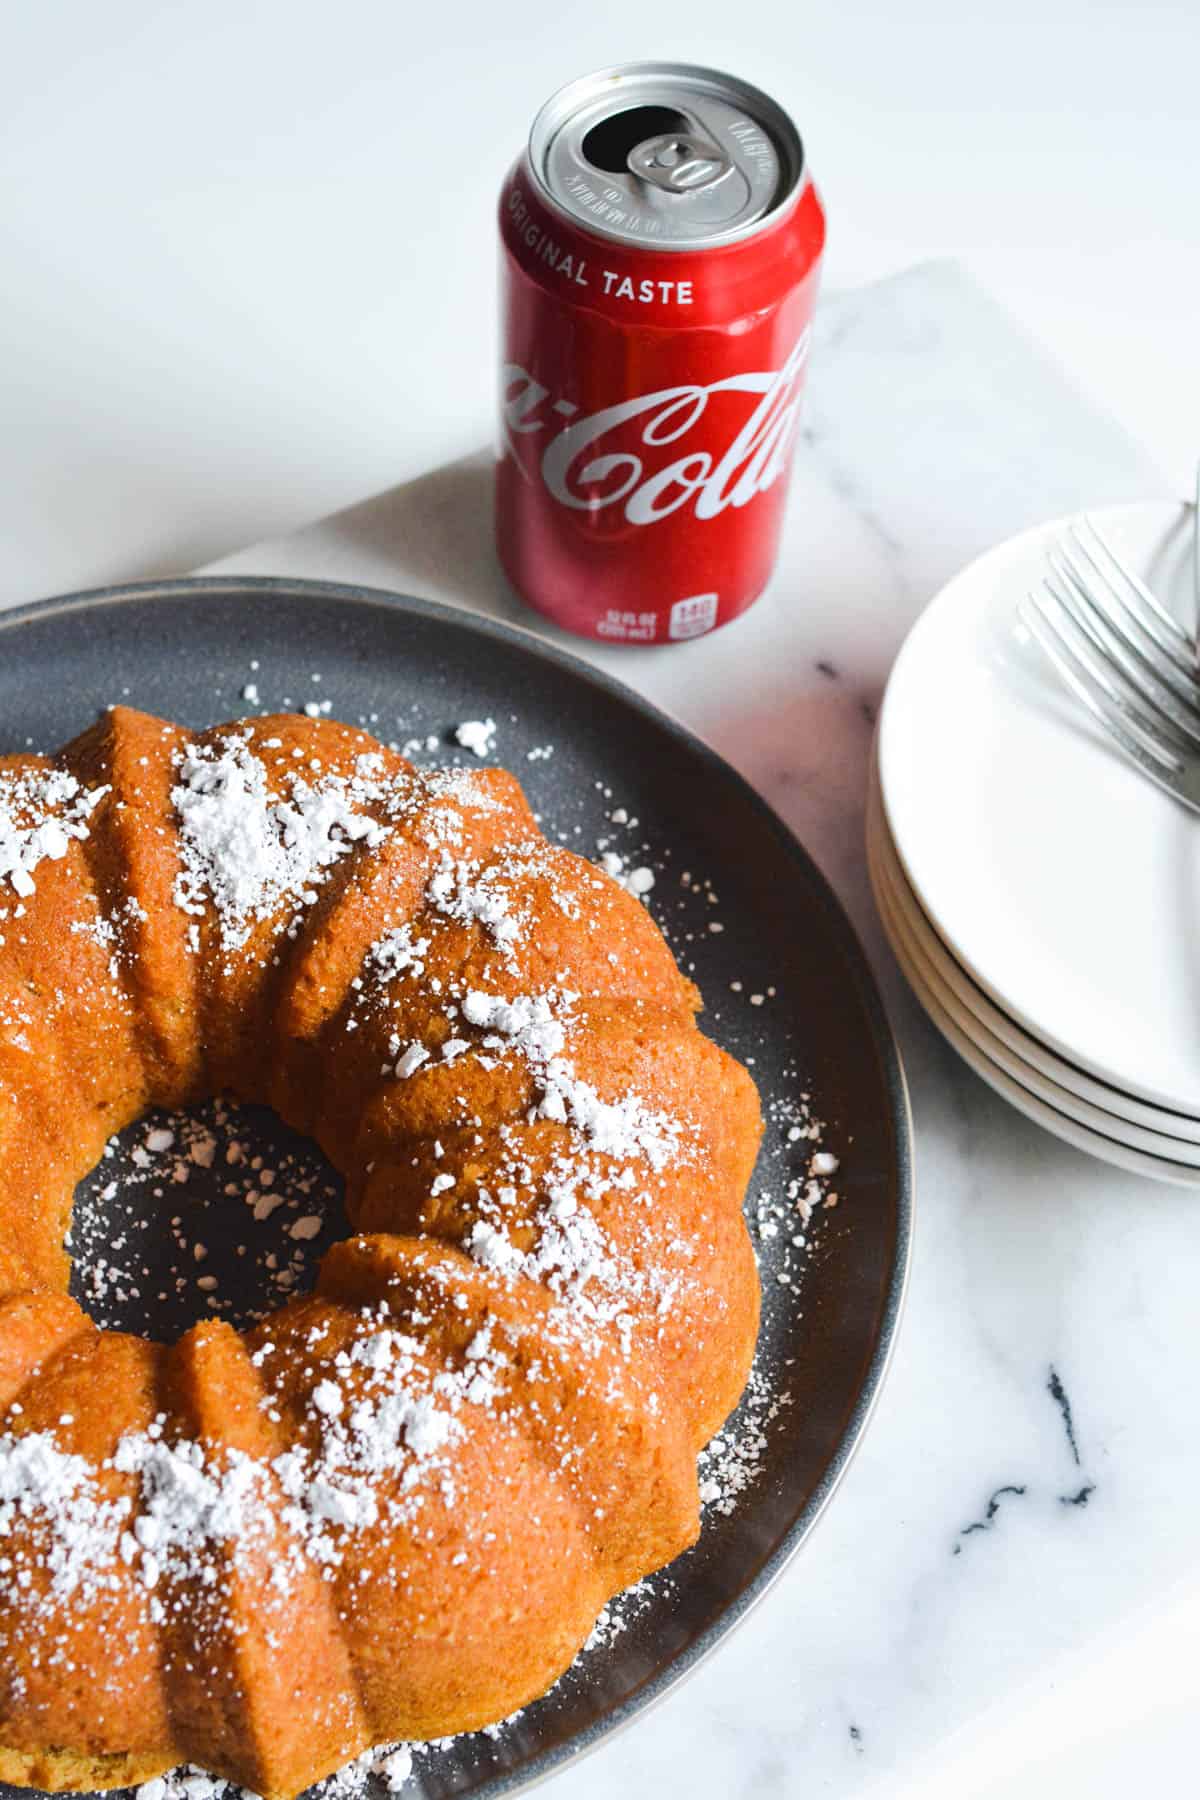 A bundt cake on a black plate on a table next to a can of Coke.